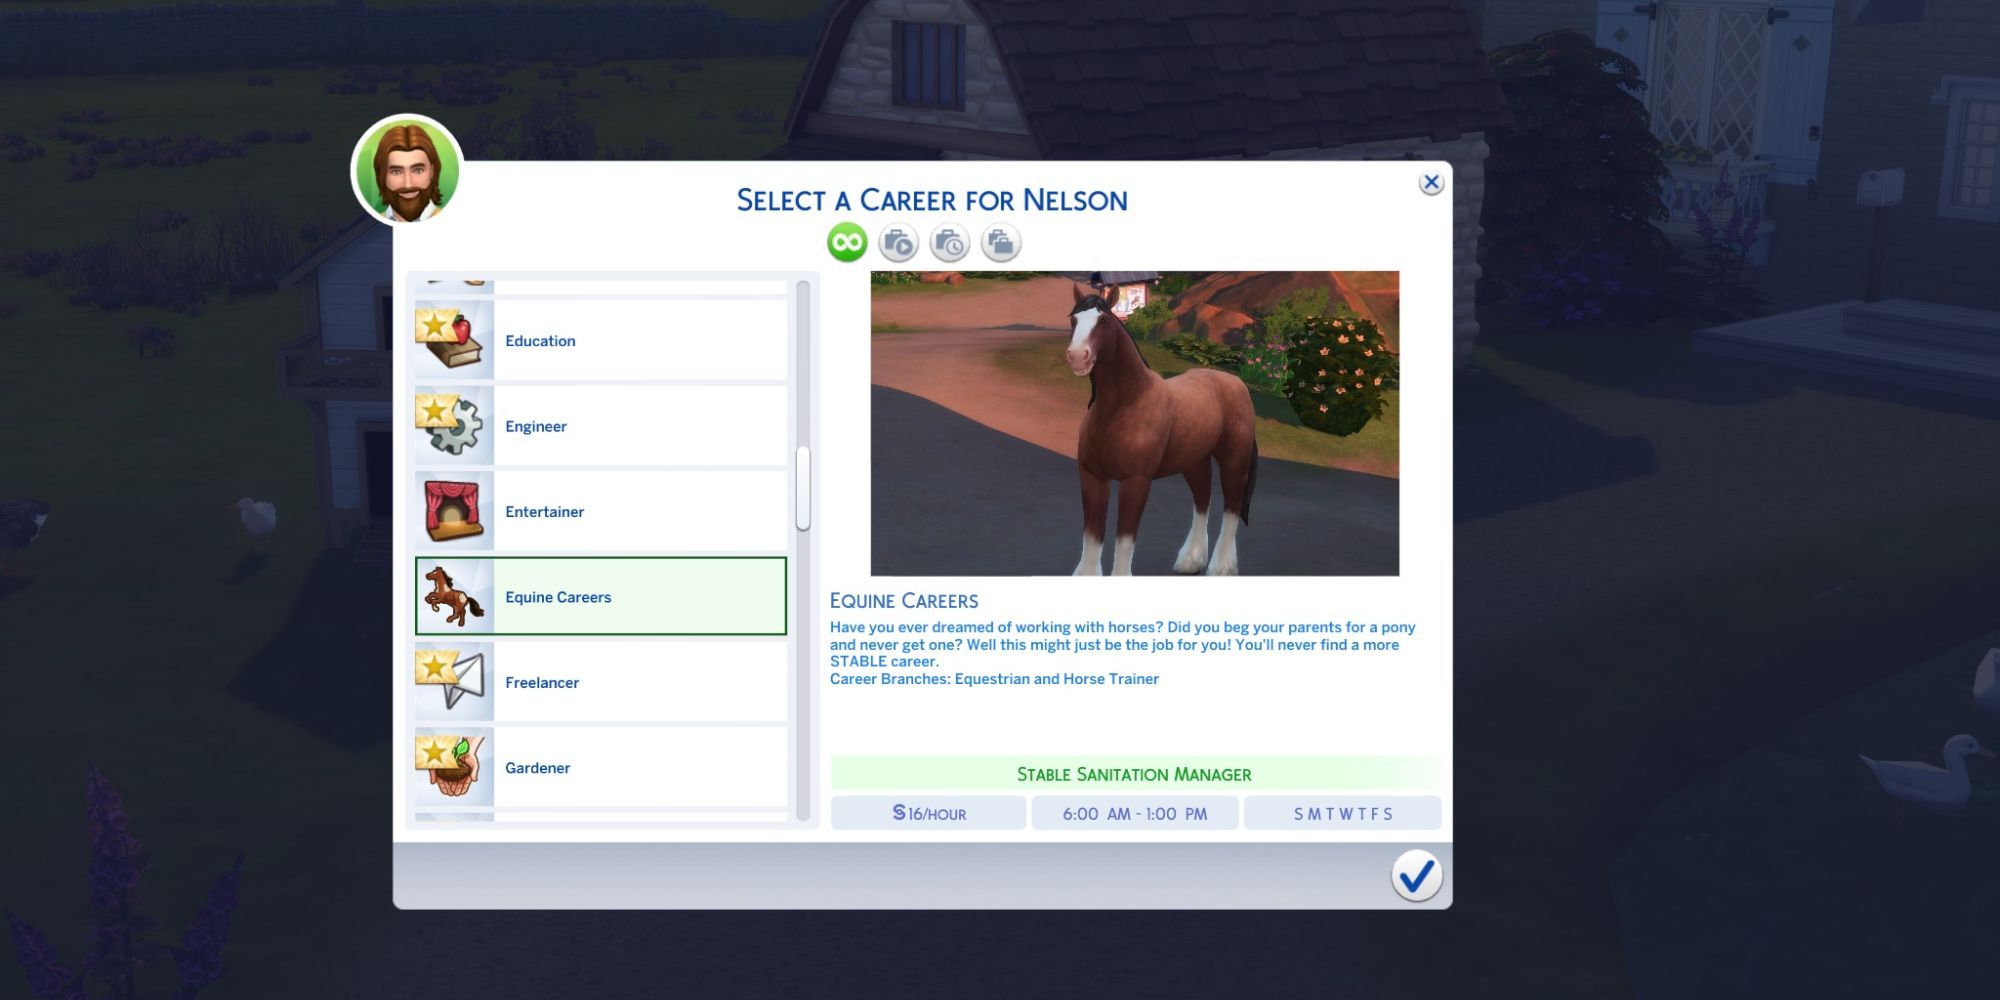  Career Panel in The Sims 4, select the Equine Career